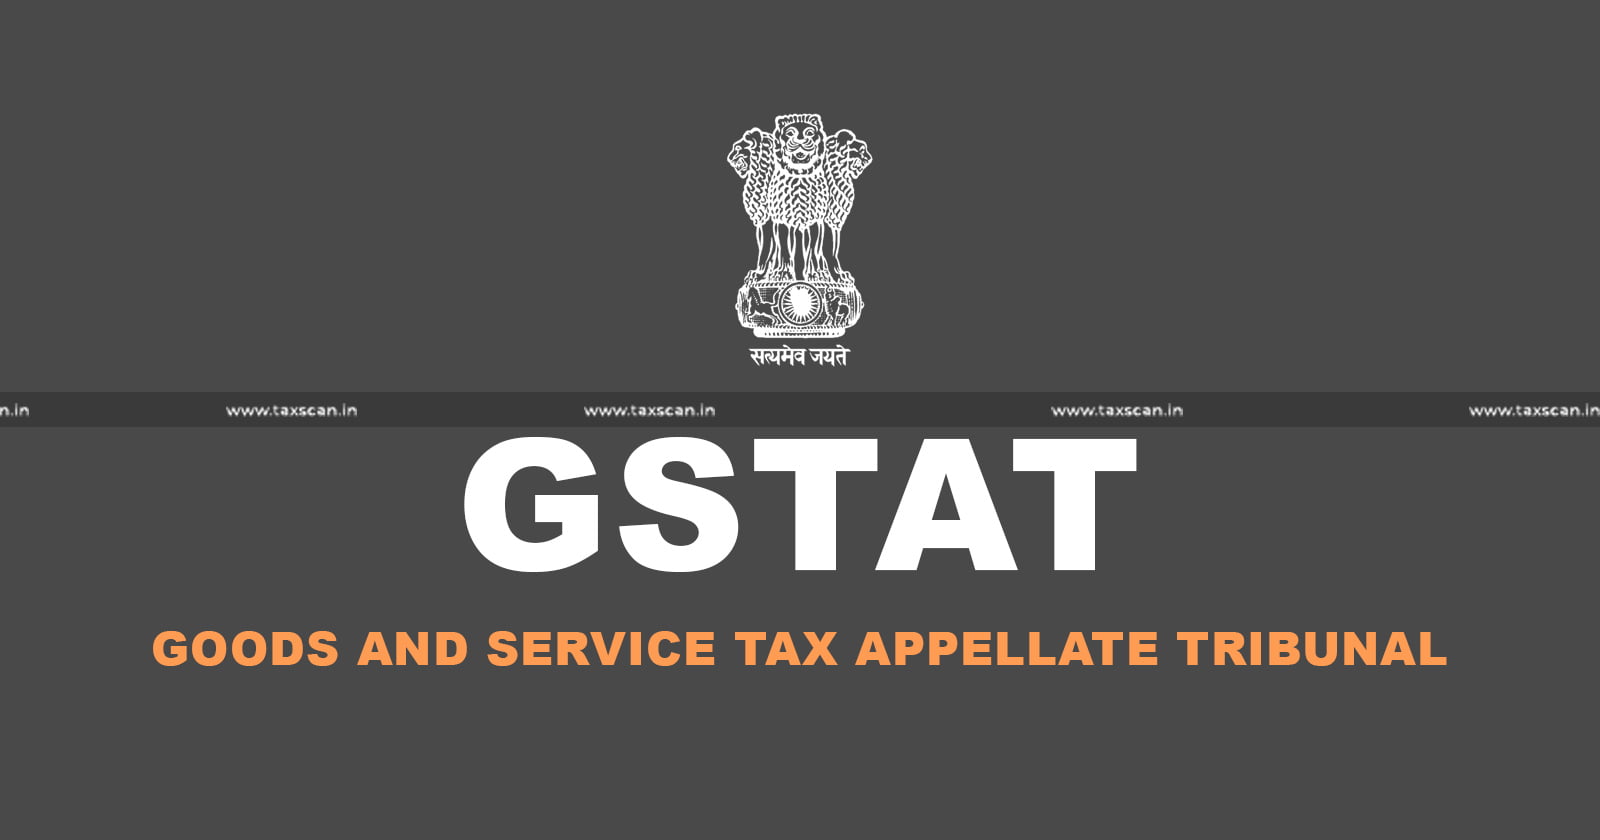 Haryana Government announcement - Haryana GST Tribunal - One Time Settlement scheme - GST Tribunal branches inauguration - taxscan